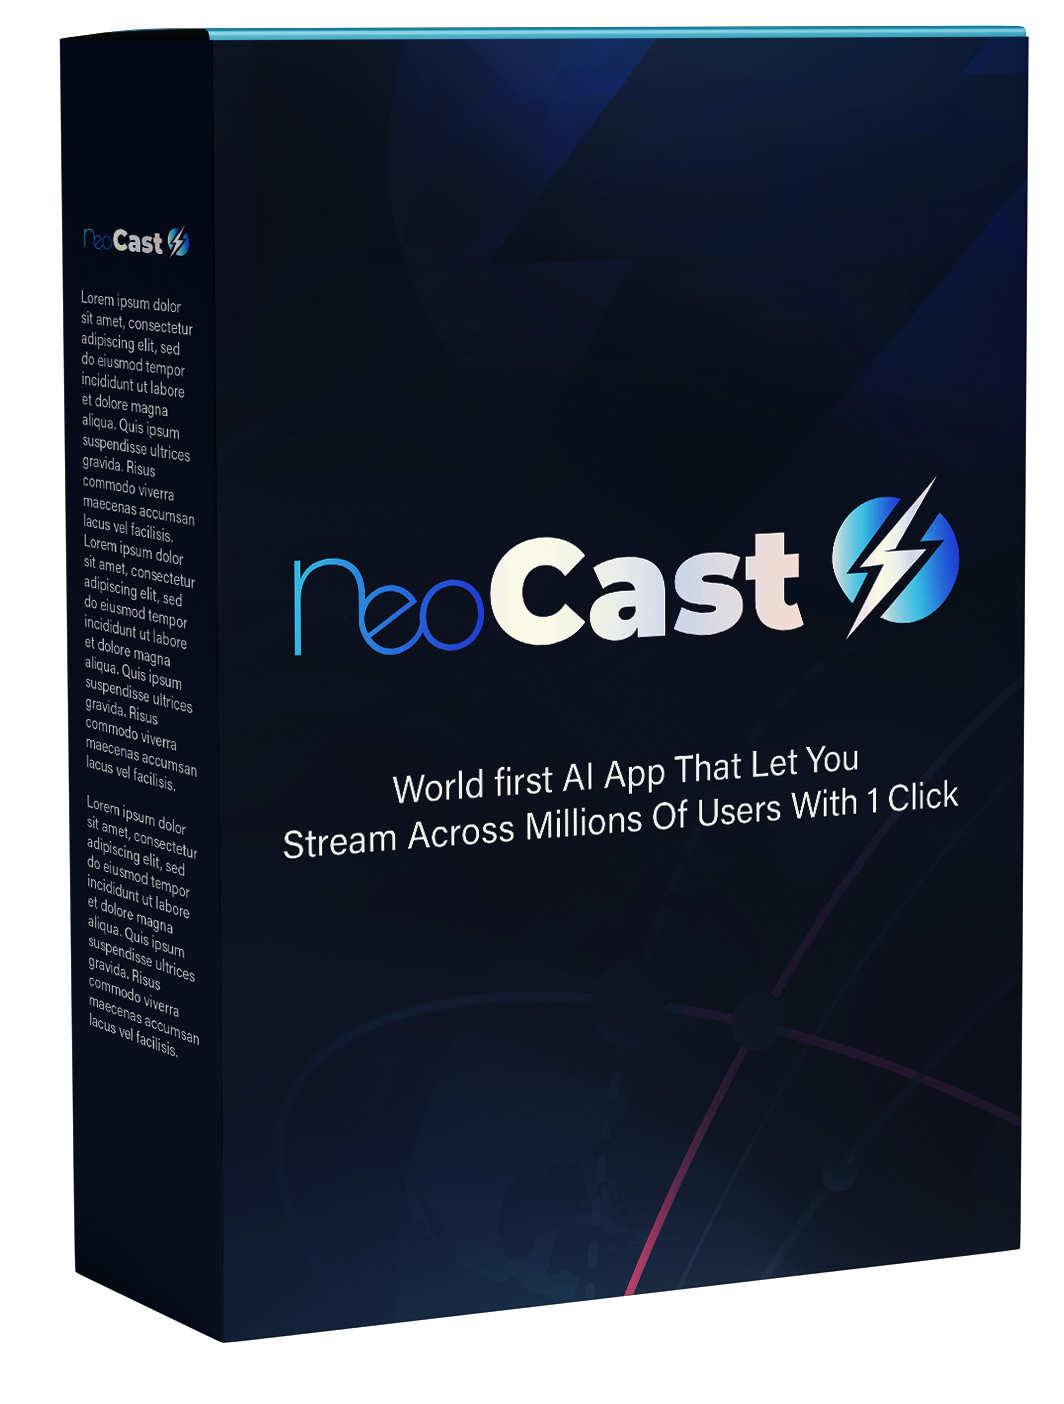 Neocast Review and Bonuses – Own your own Tv-Channel in 2023 without any hassle